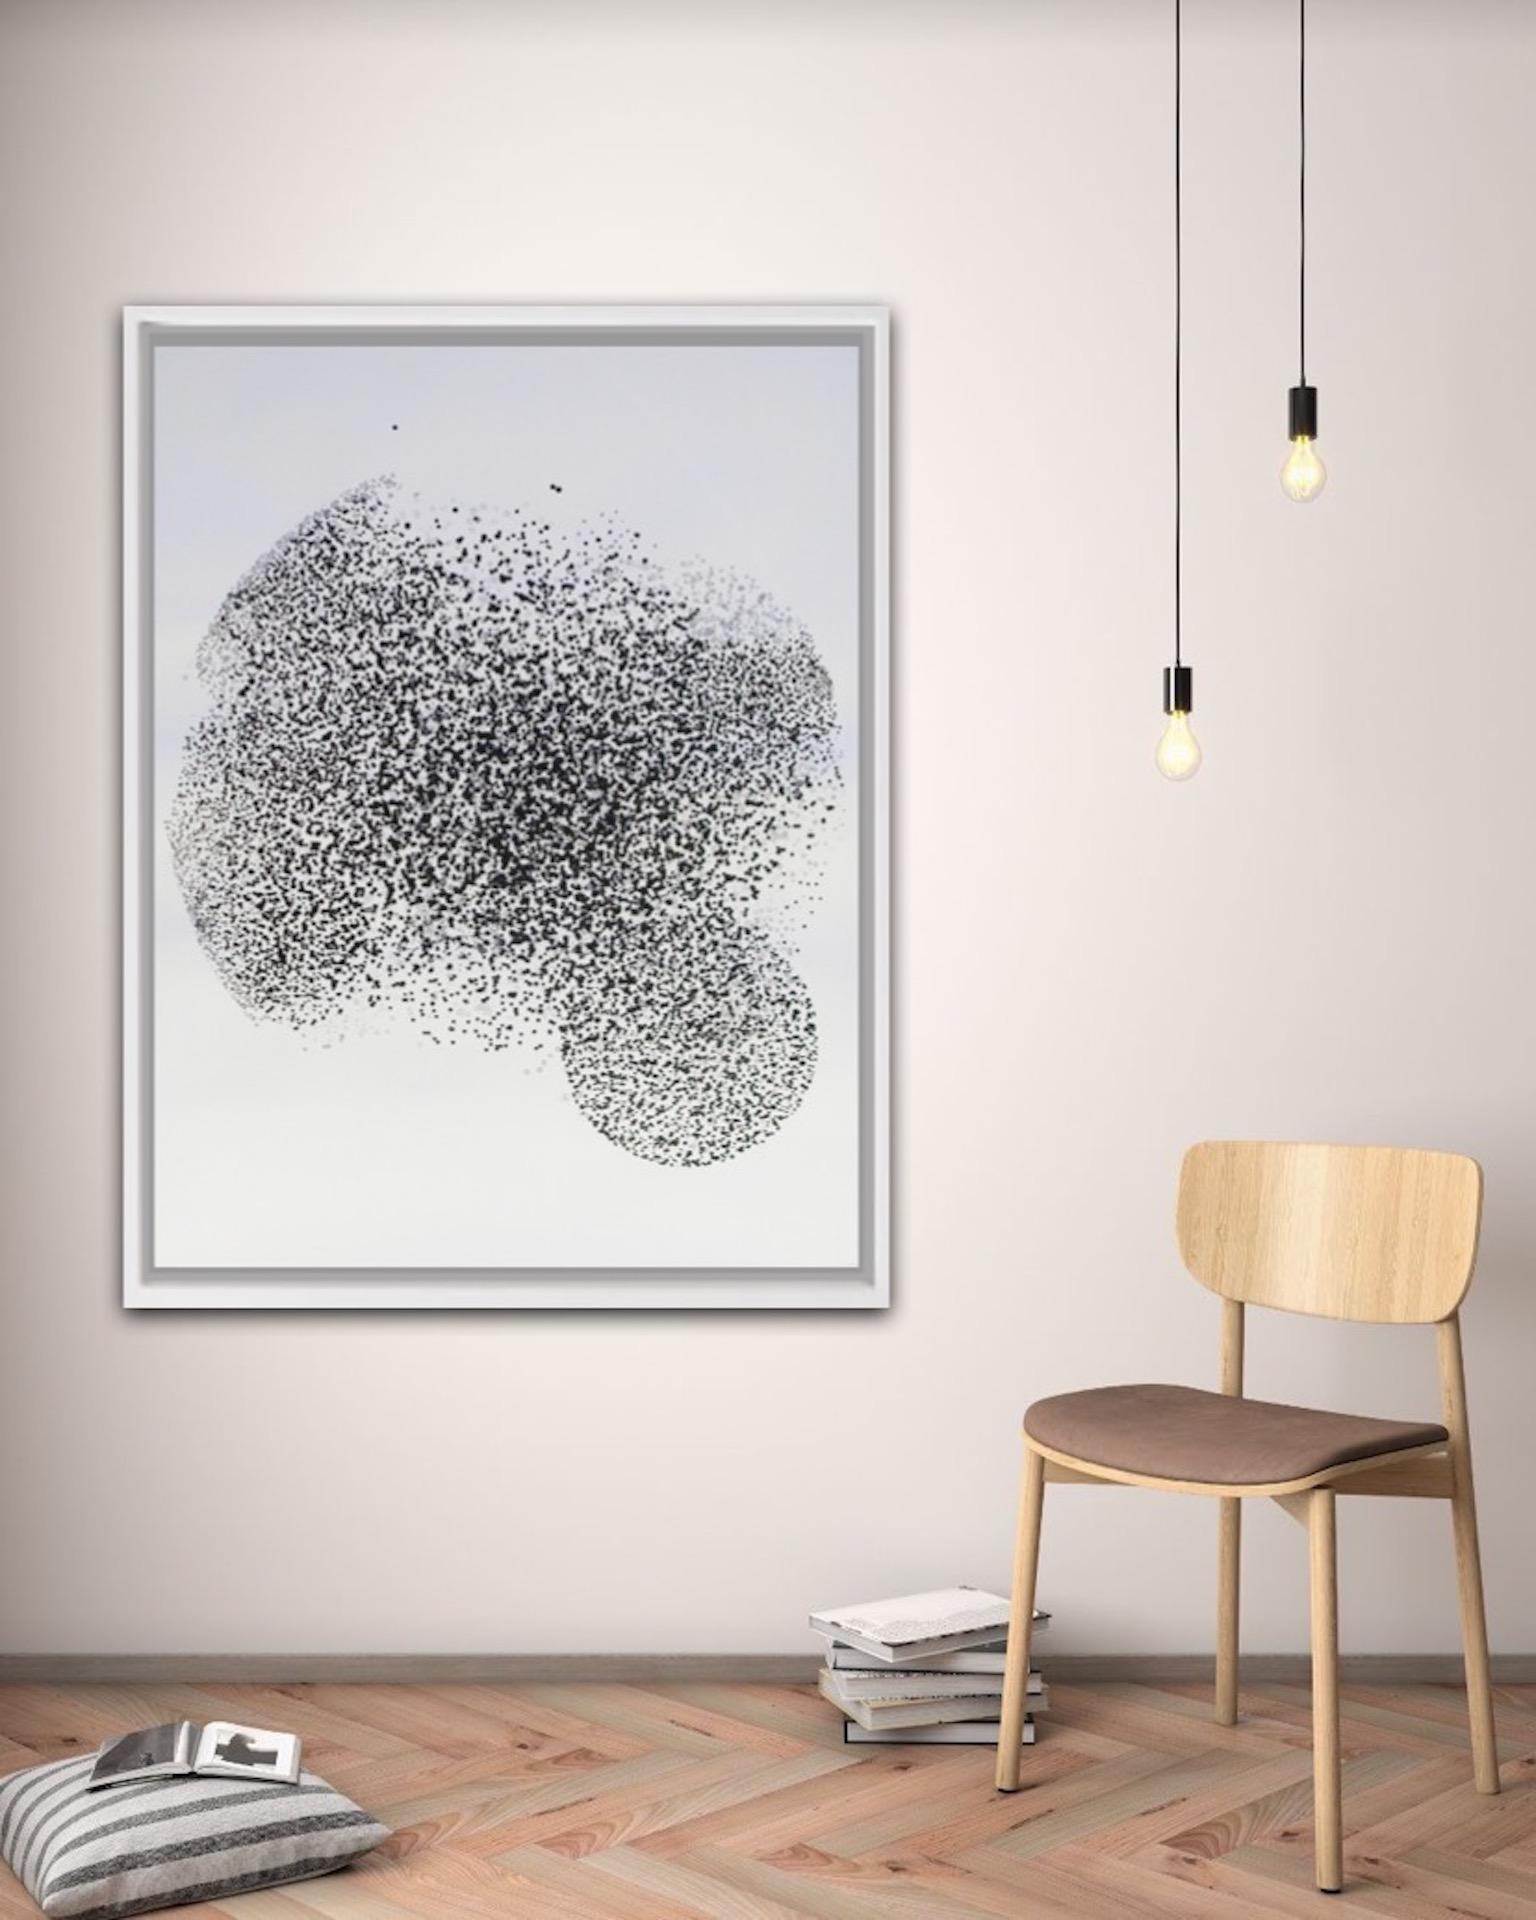 Nigel Bird
Constellations
Drawing
Ink on Paper
Size: H 130cm x W 94cm
(Please note that in situ images are purely an indication of how a piece may look).

A drawing of constellations of Stars (as seen through a telescope) by Nigel Bird.
This is Ink